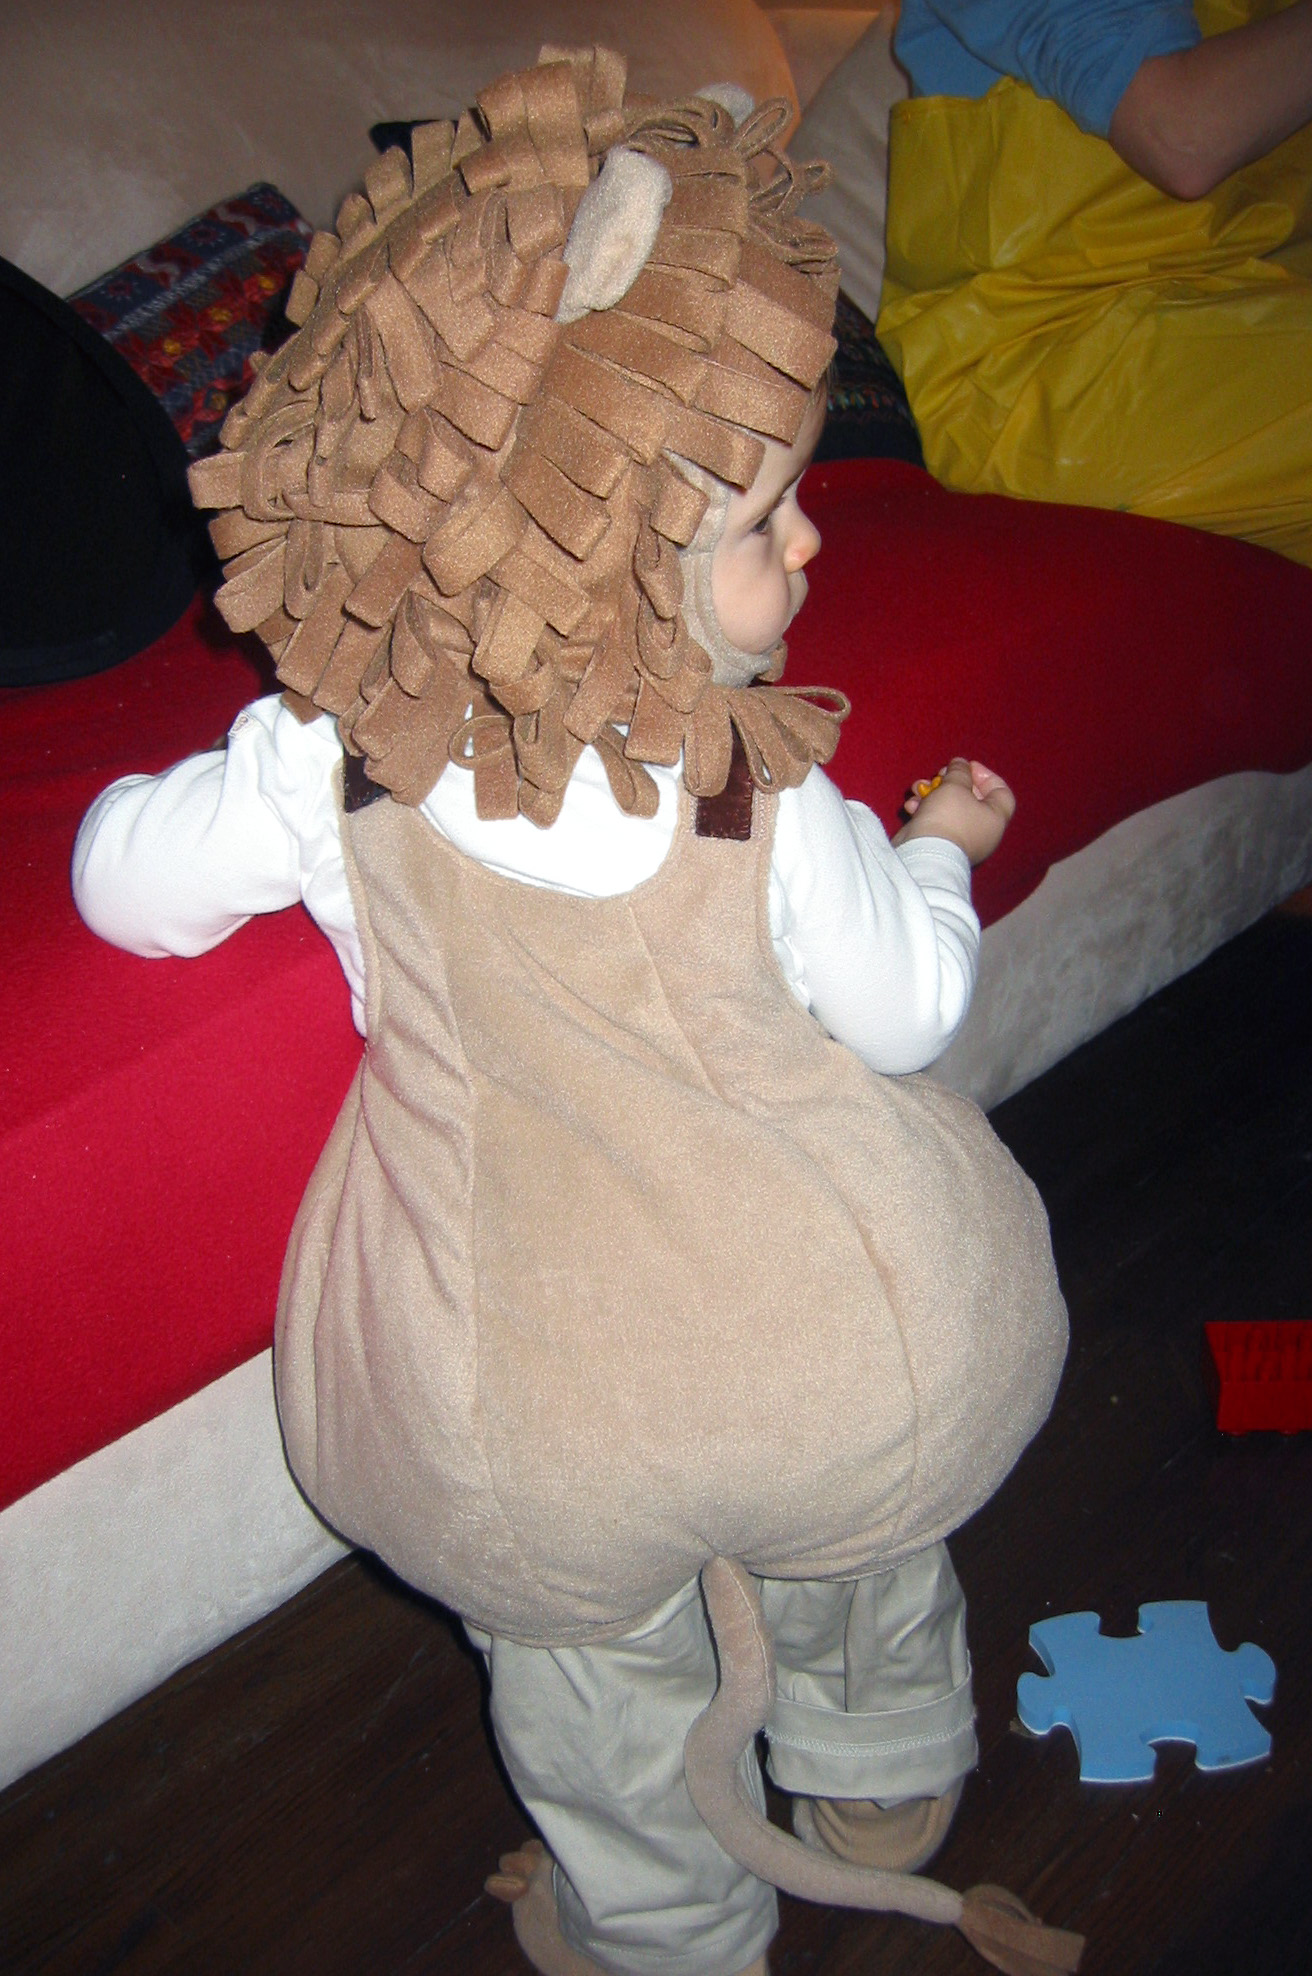 Infant in a lion costume